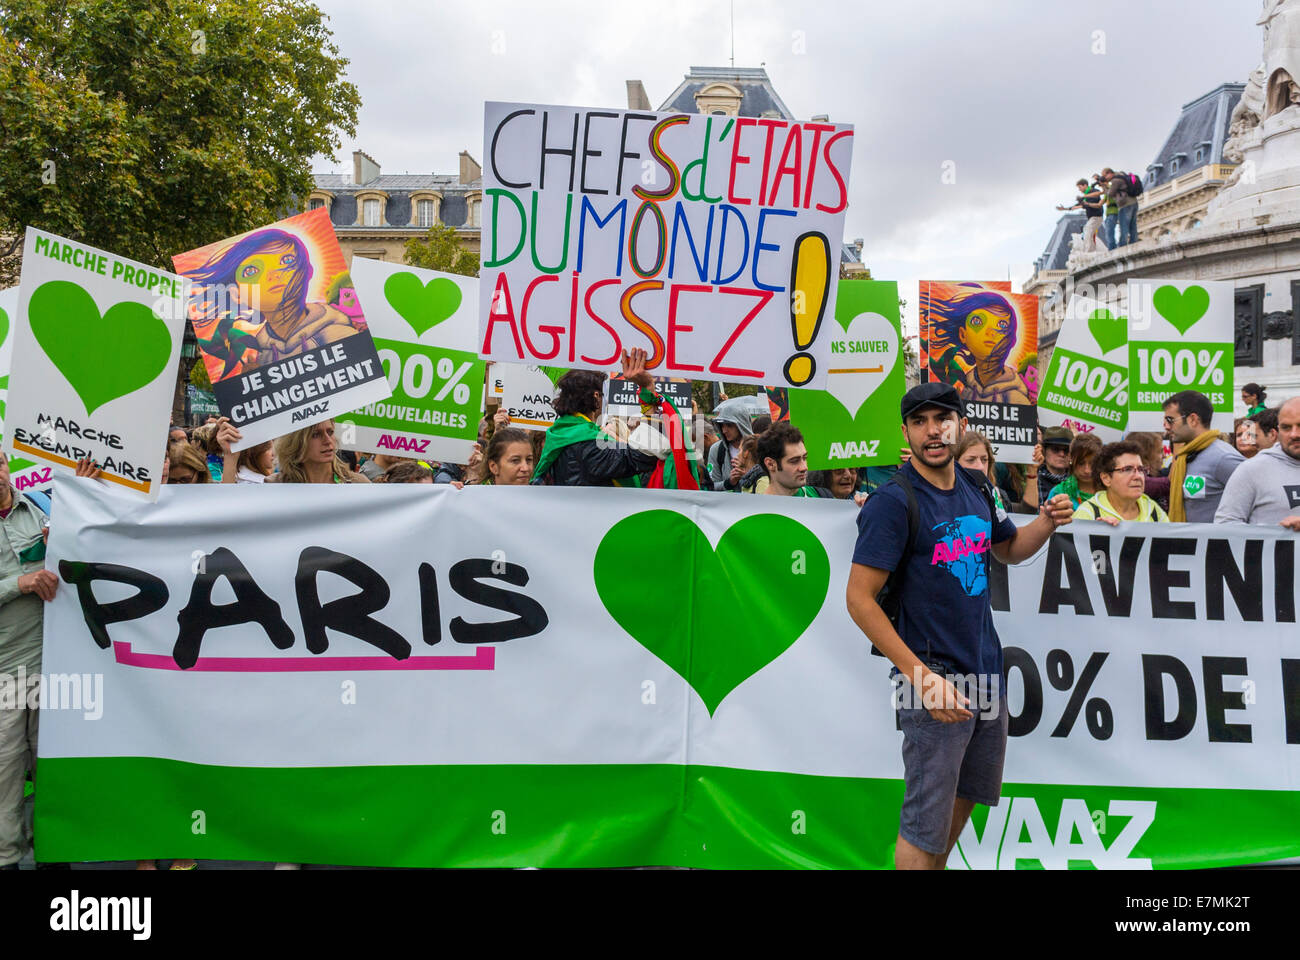 Paris, France, Public Demonstration, International Climate Change March and Rally French Crowd Holding French climate protest sign, poster and Banners on Street, protests france ecology demonstration, France Protests Stock Photo